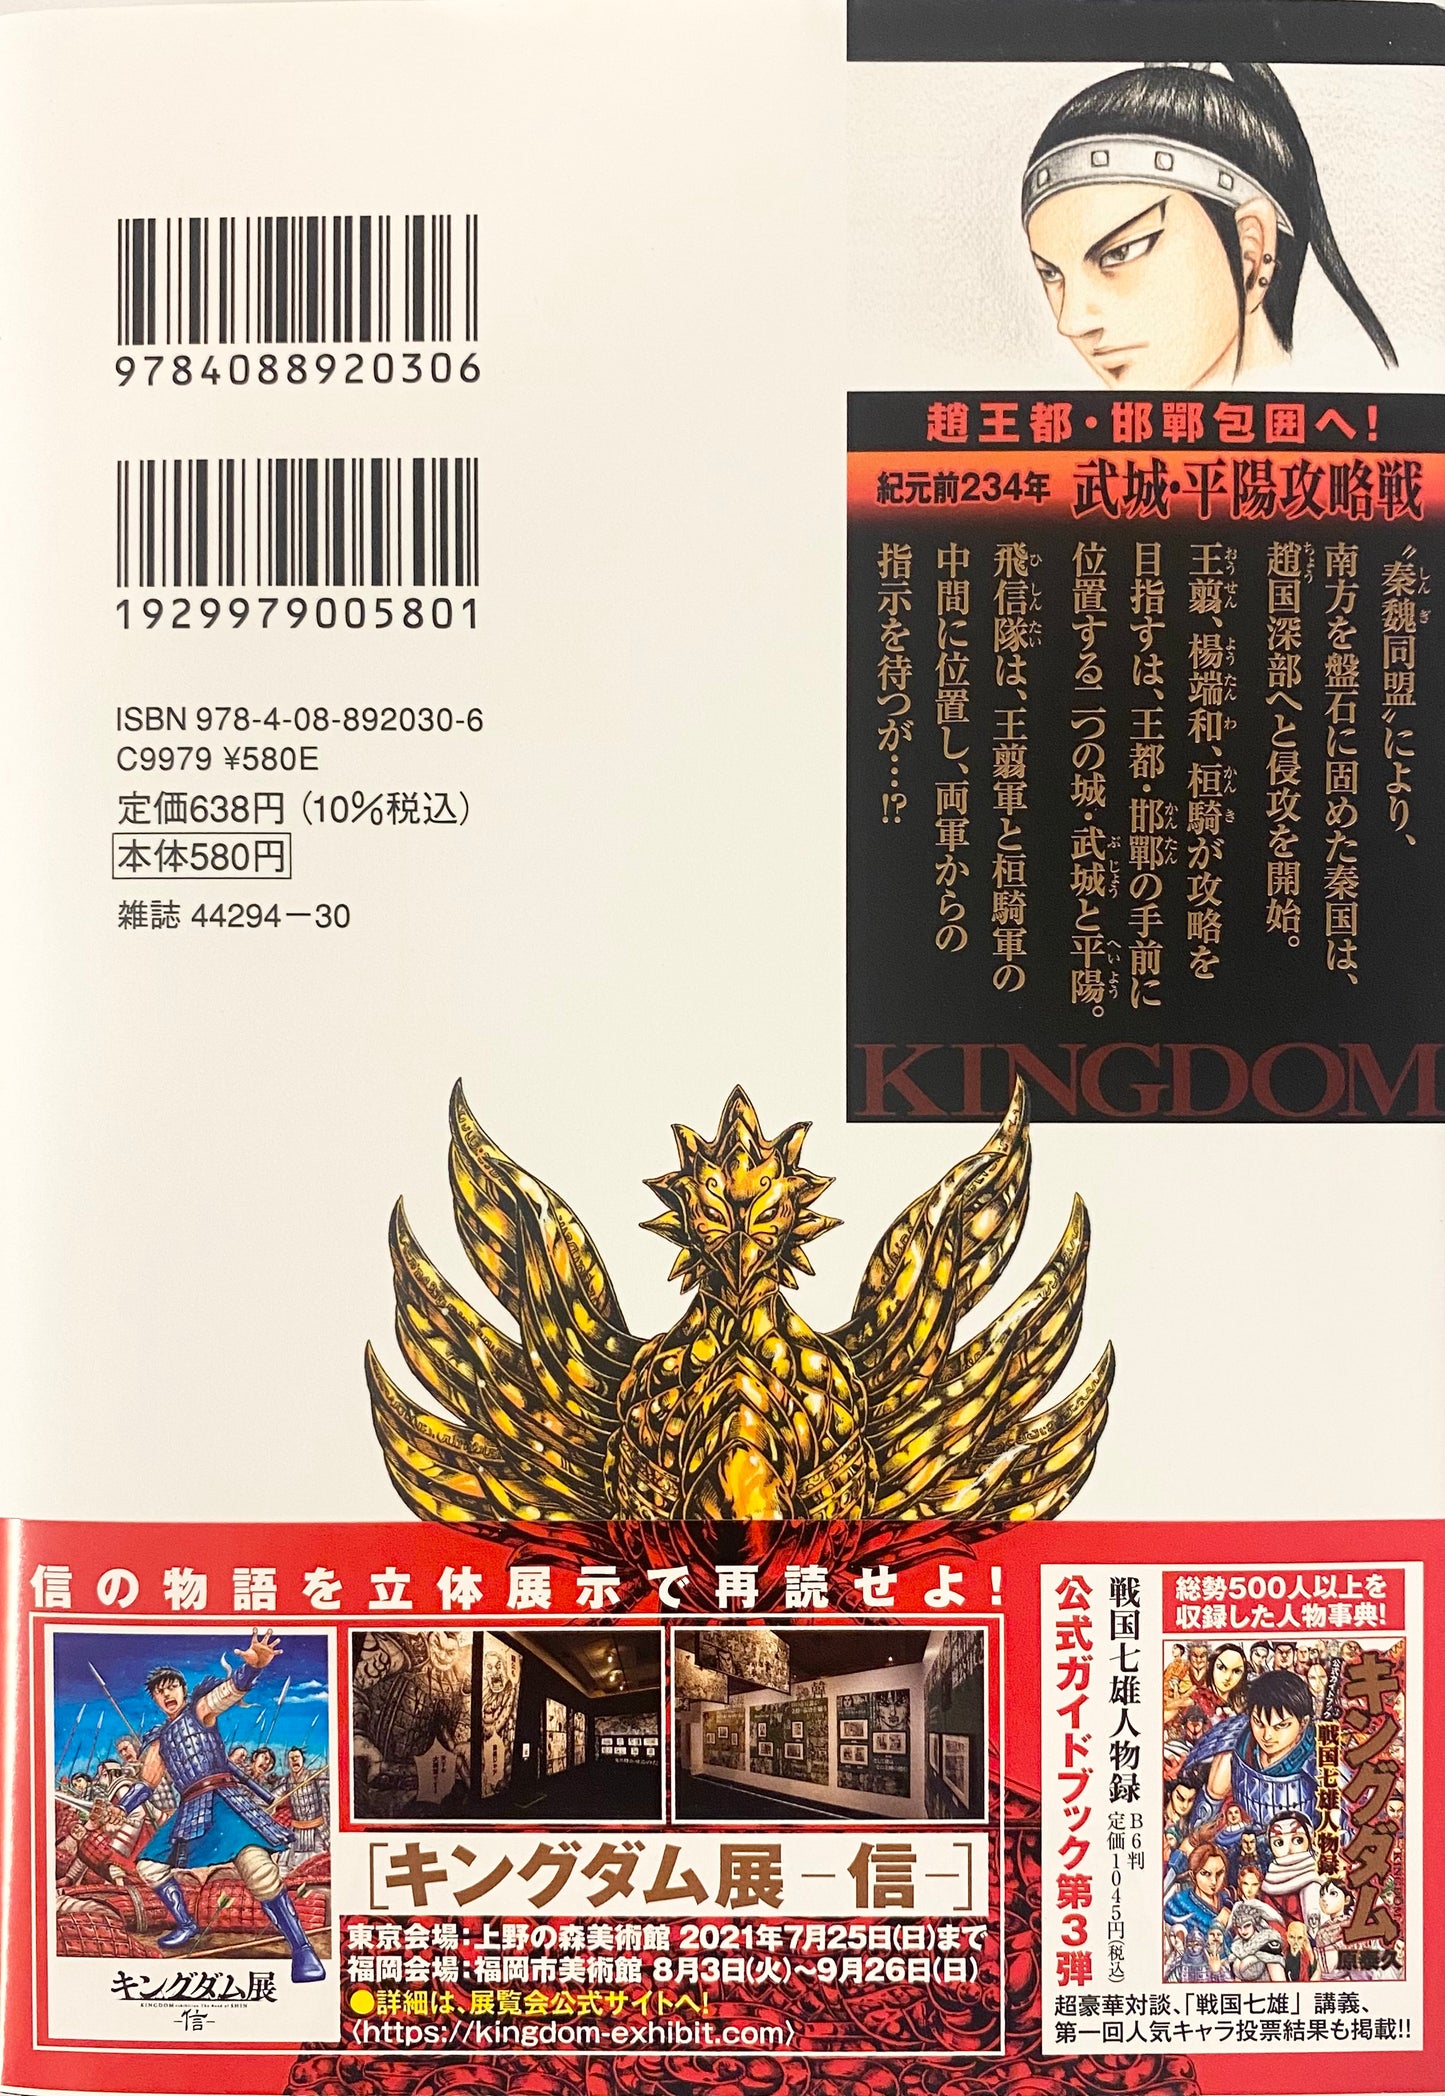 Kingdom Vol.62-Official Japanese Edition